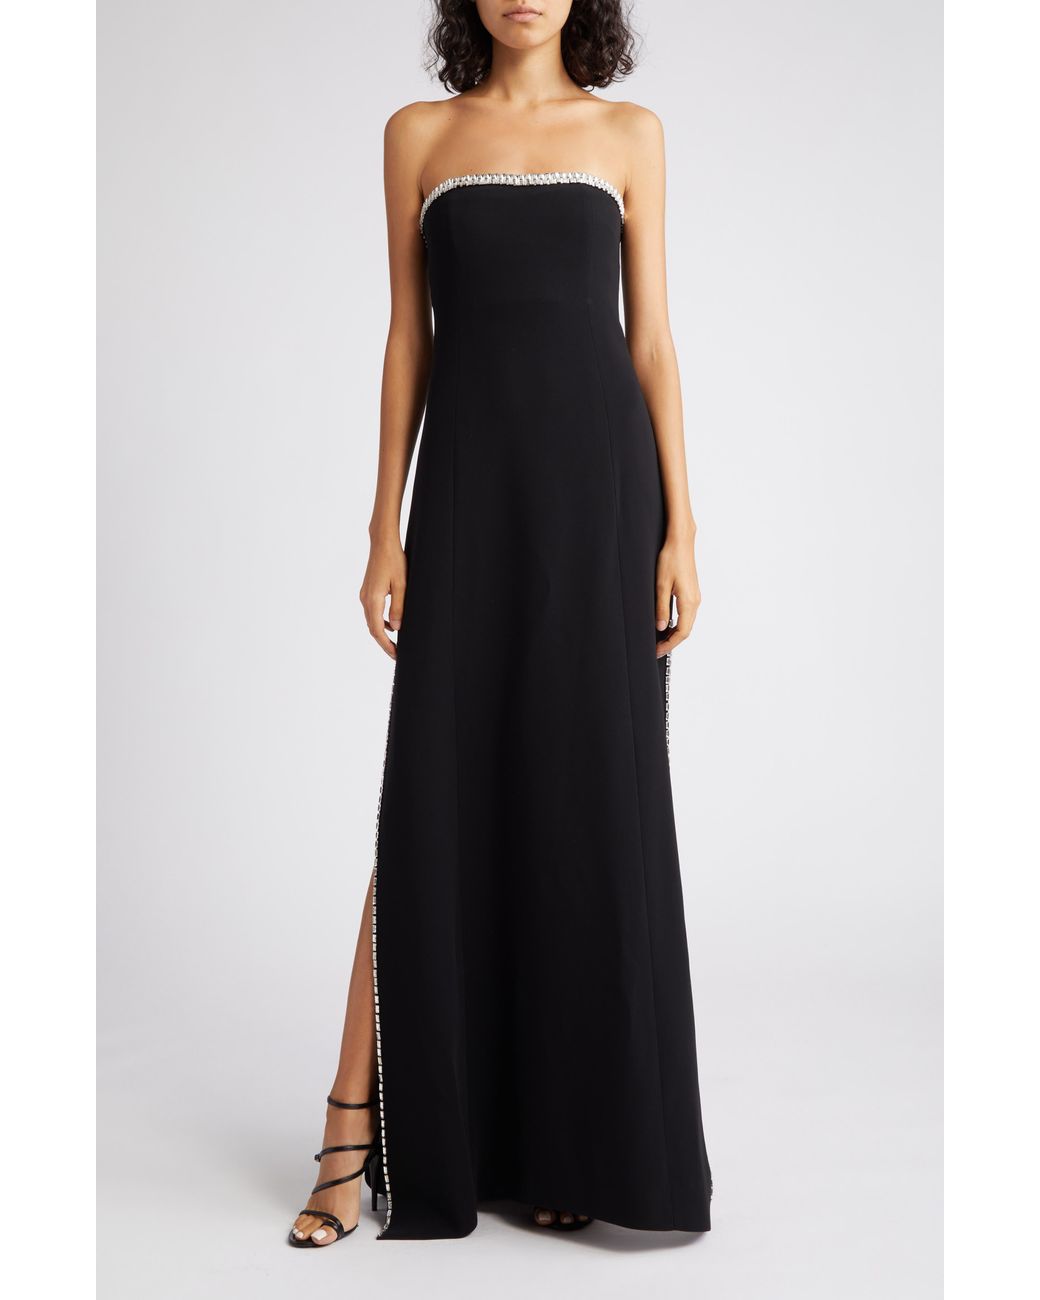 Cinq À Sept Collins Embellished Strapless Gown in Black | Lyst